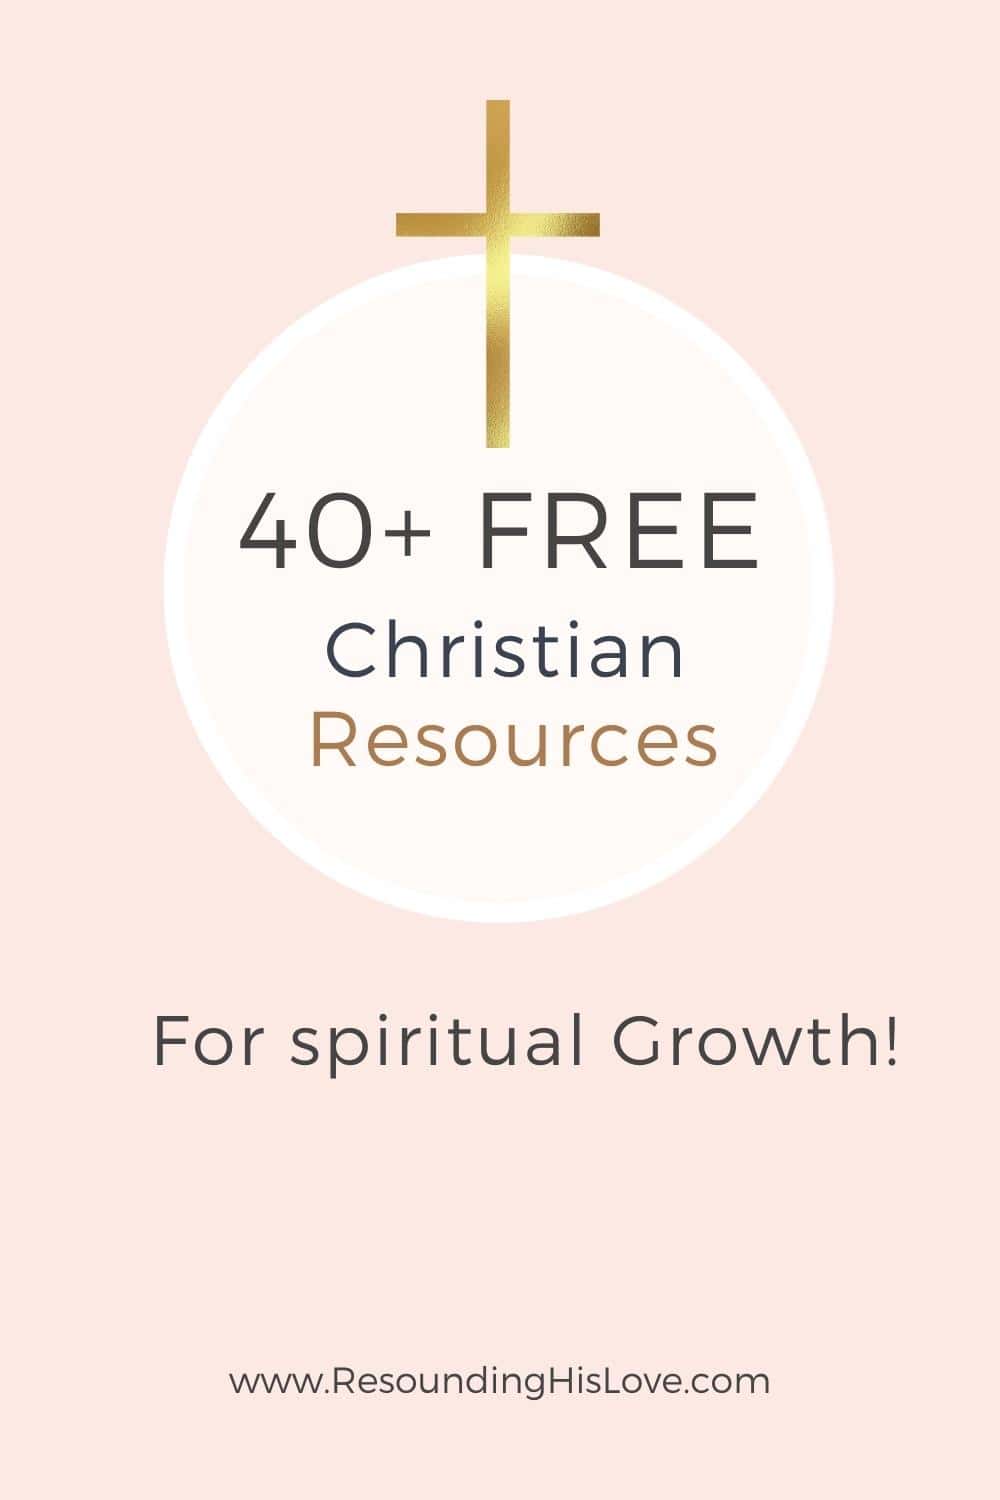 light pink background with a gold cross in the center with text 40+ FREE Christian Resources for Spiritual Growth